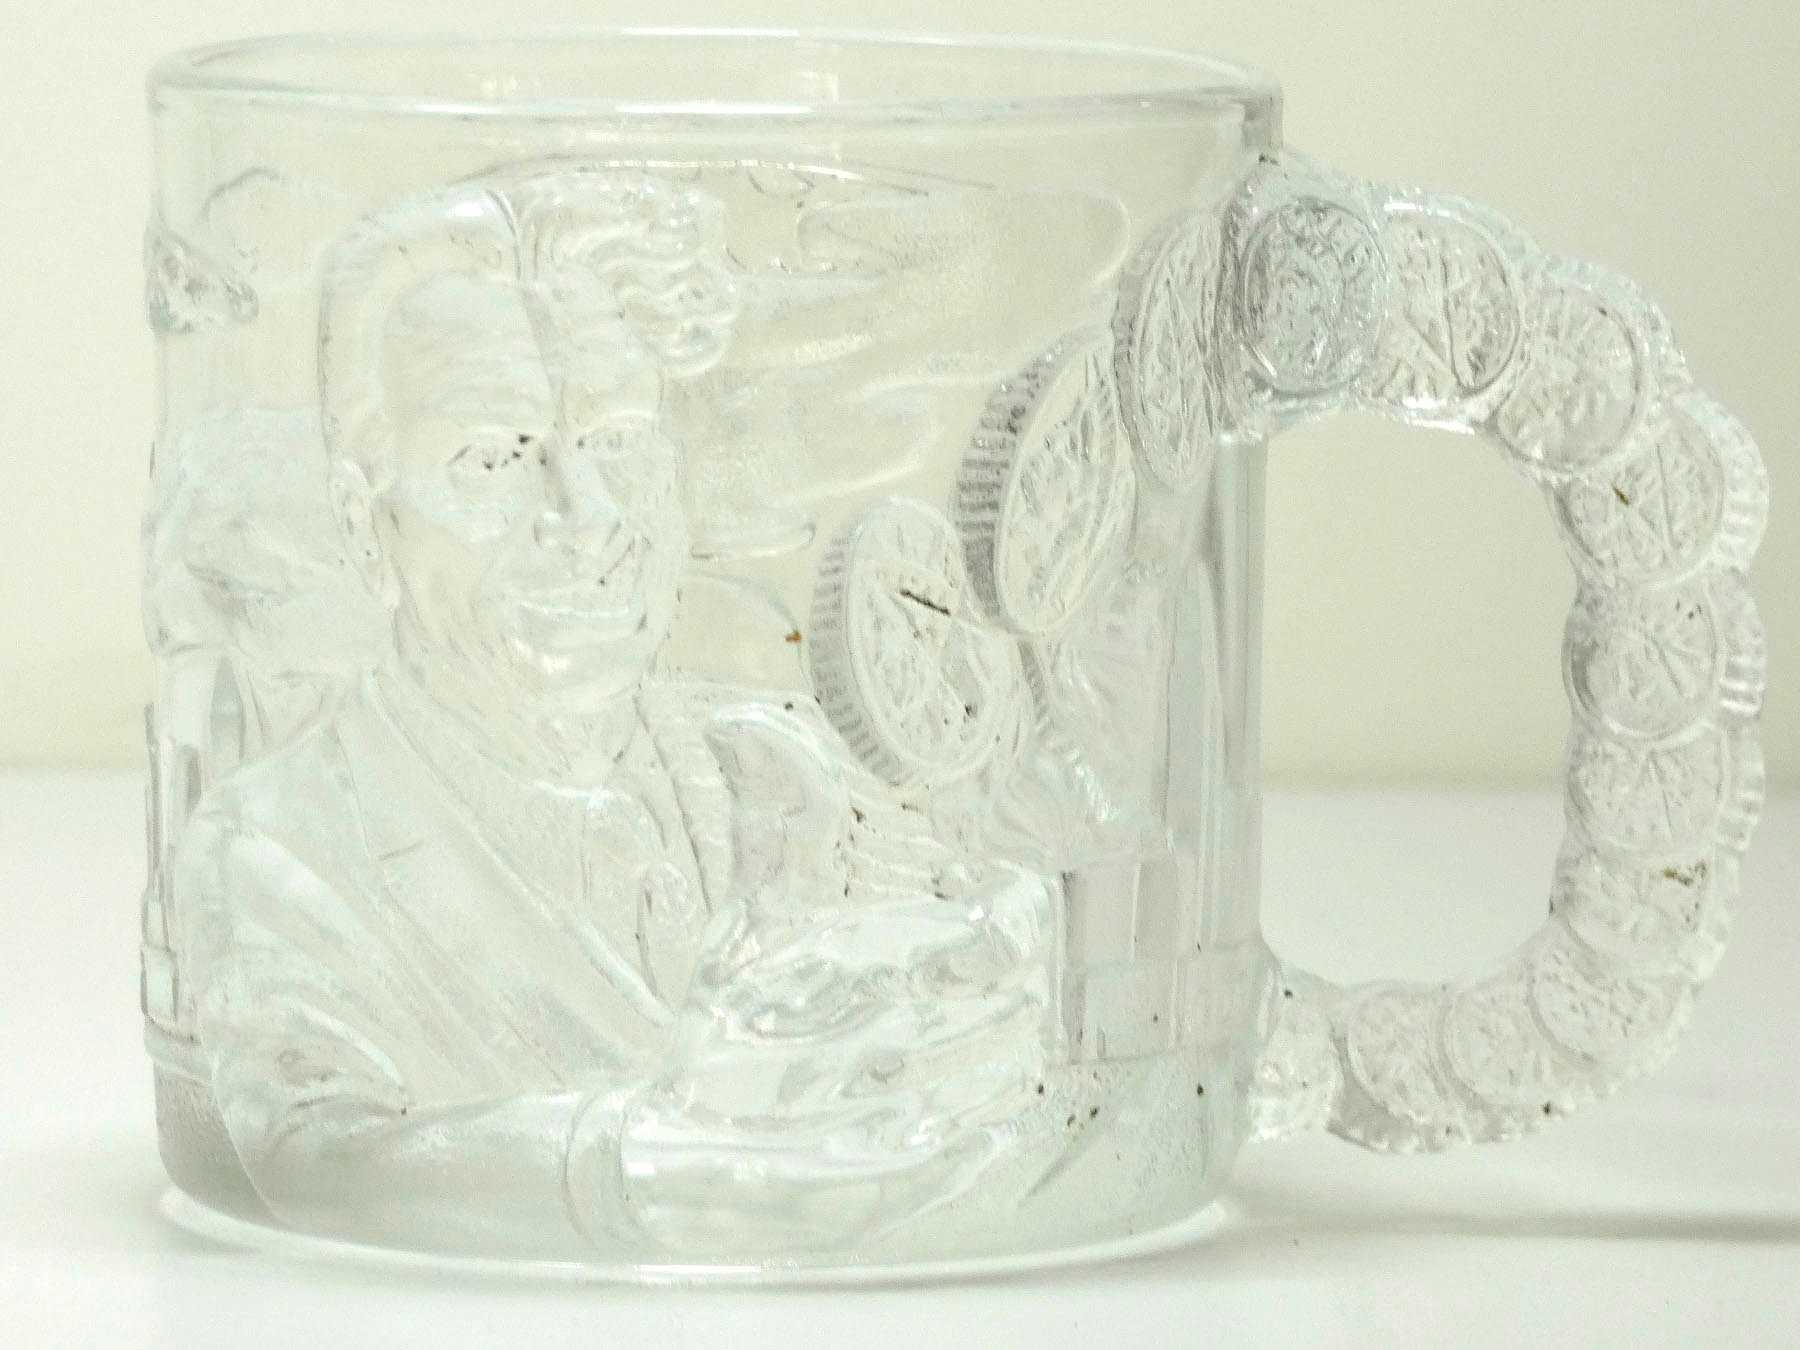 A set of four Batman Forever (1995) glass mugs, available to purchase from McDonalds stores to - Image 6 of 13